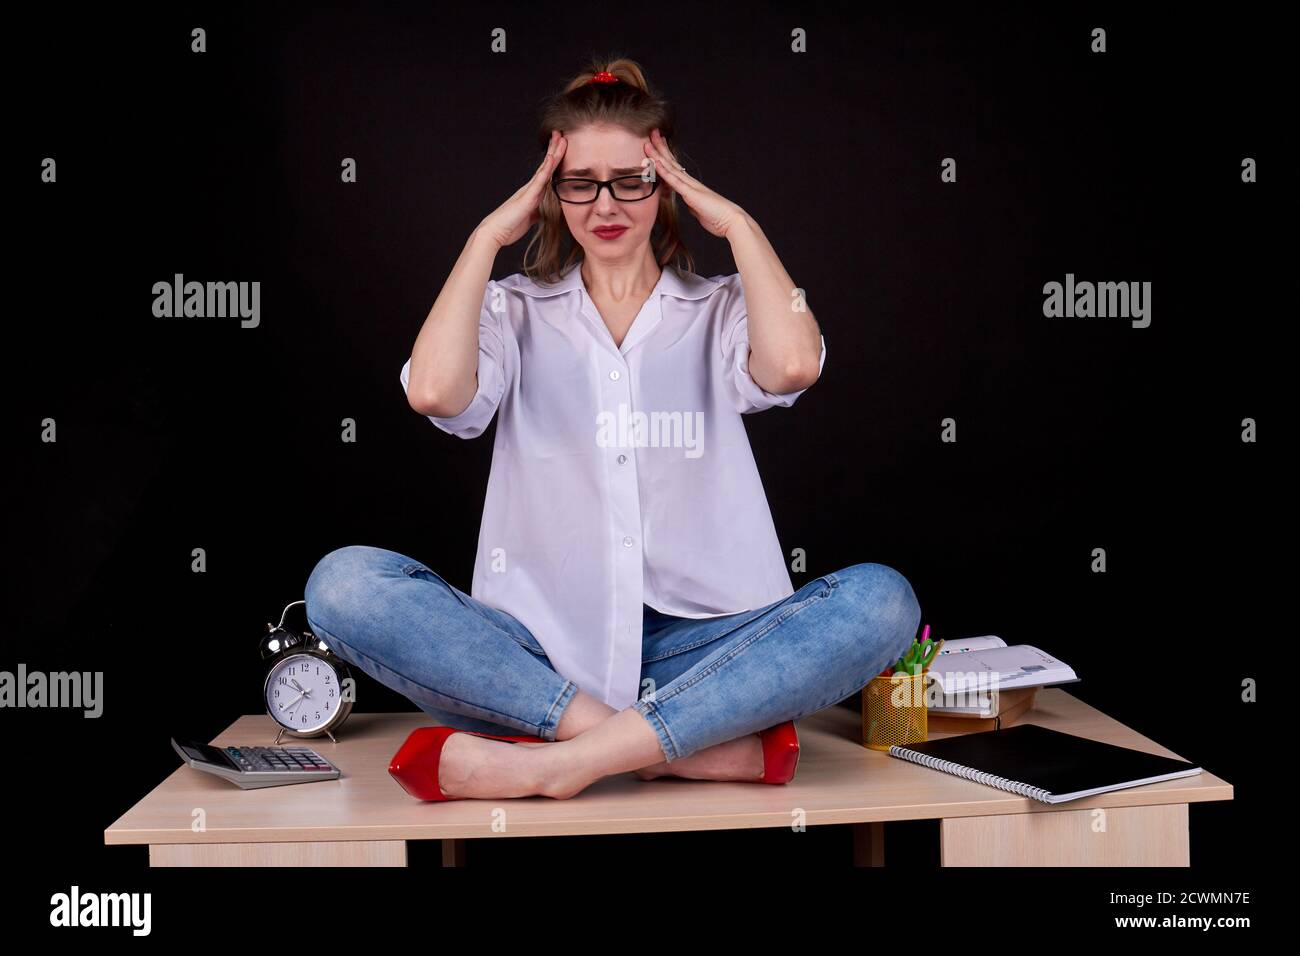 Sad student girl is touching her temples. Stock Photo